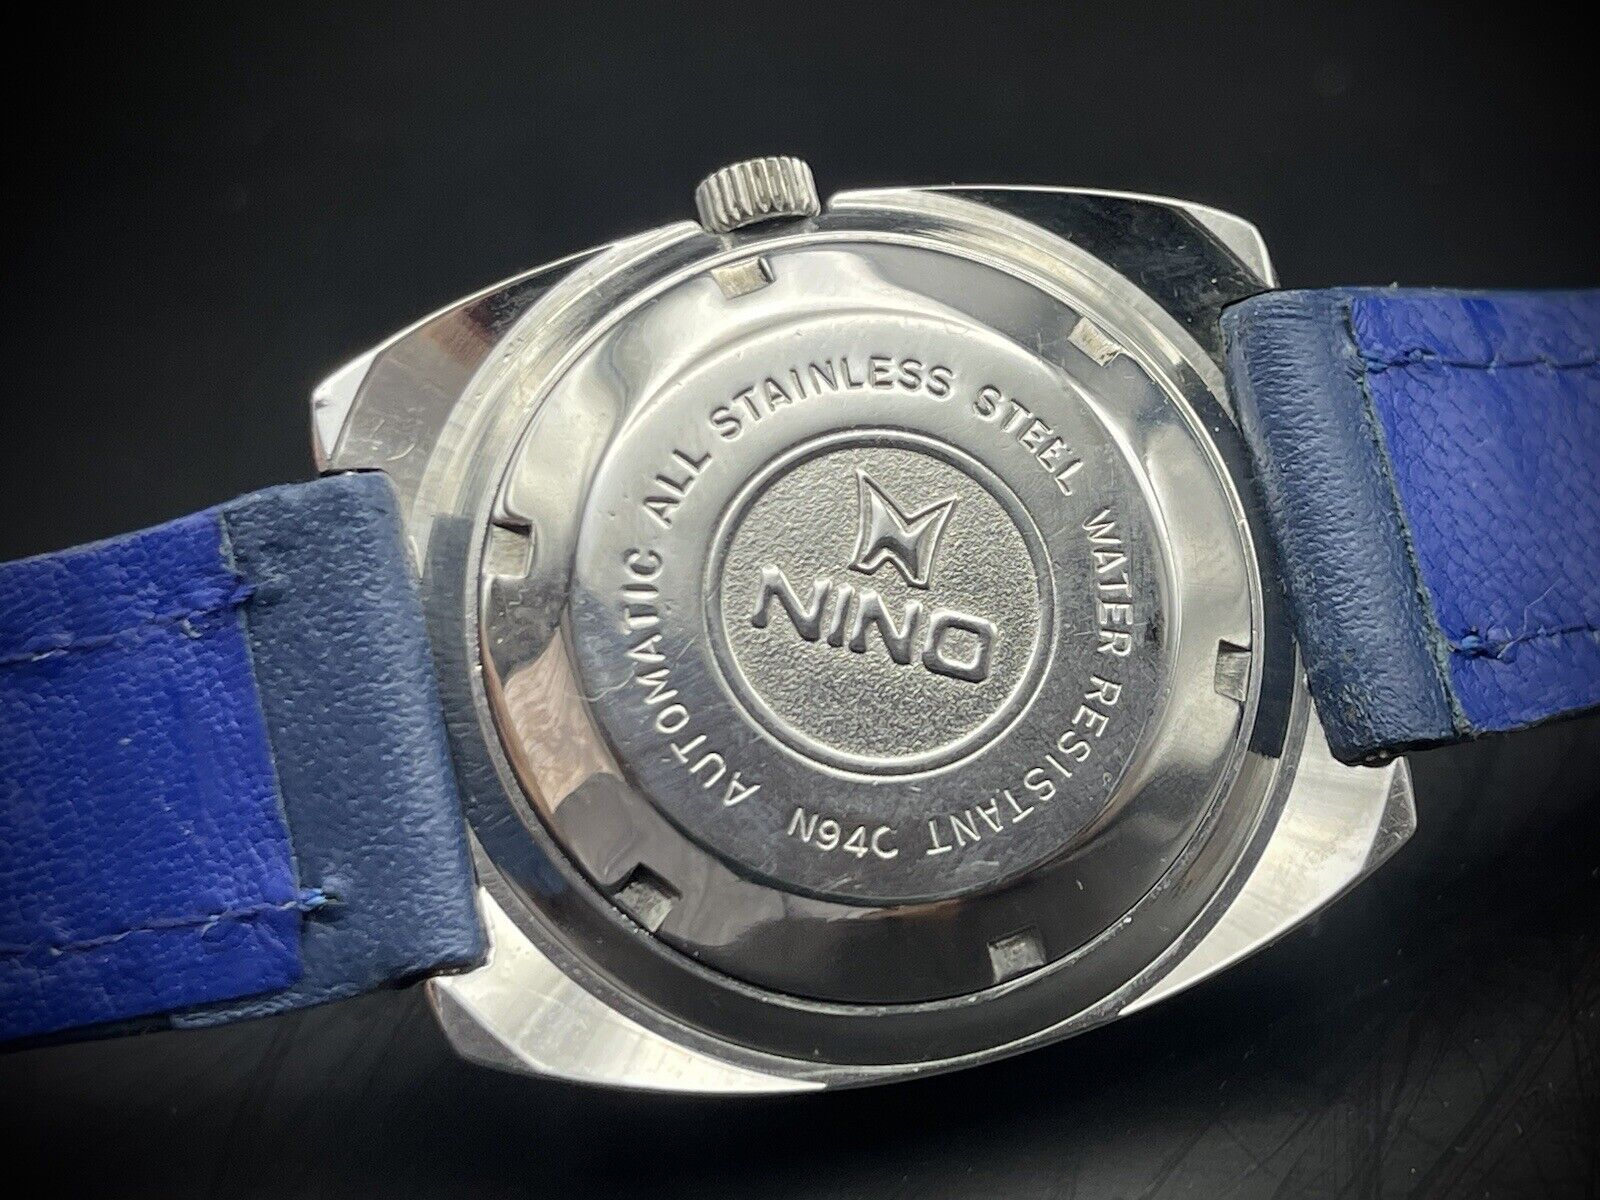 Vintage Nino Unique Dial 37mm Gents Watch, Swiss made - Grab A Watch Co